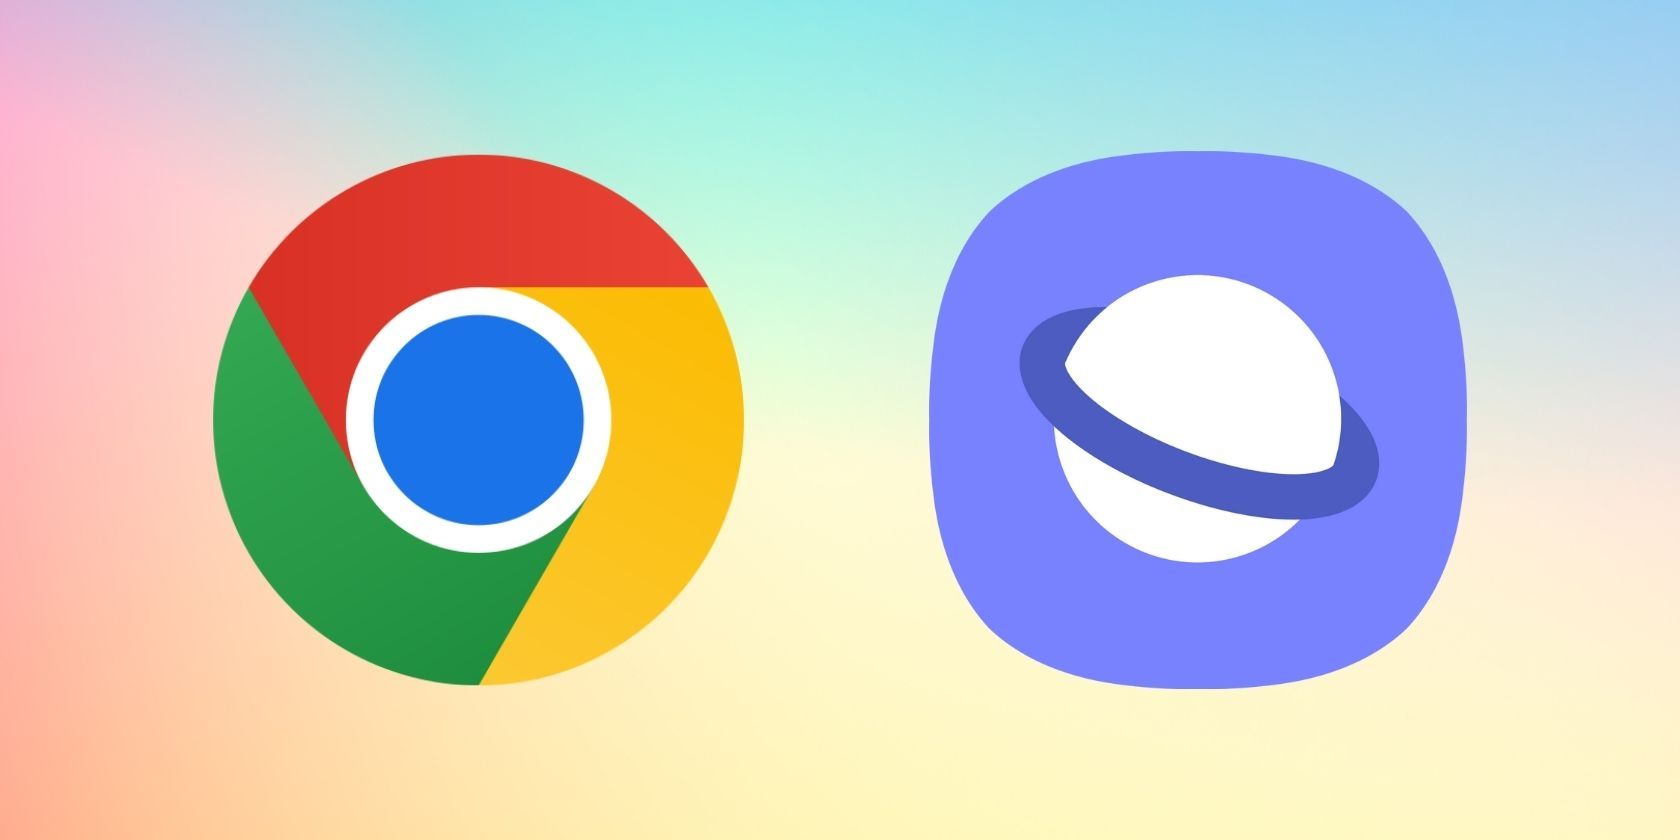 Google Chrome vs. Samsung Internet: Which Android Browser Is Better?